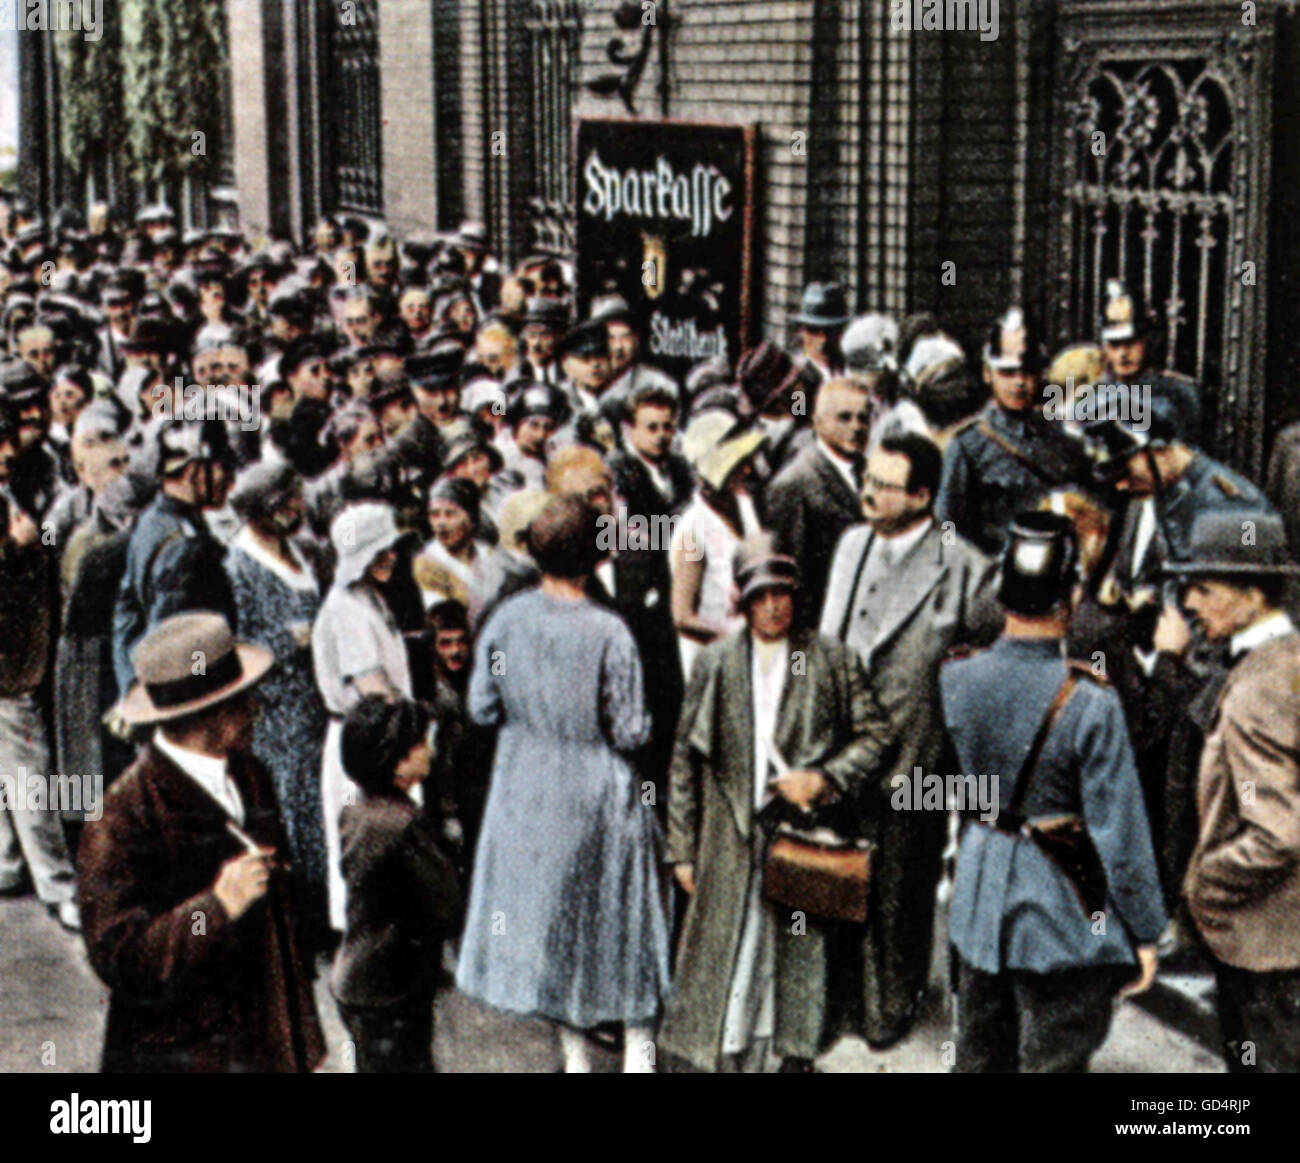 German banking crisis 1931, crowd in front of the closed municipal savings bank, Berlin, 13.7.1931, coloured photograph, cigarette card, series 'Die Nachkriegszeit', 1935, Additional-Rights-Clearences-Not Available Stock Photo